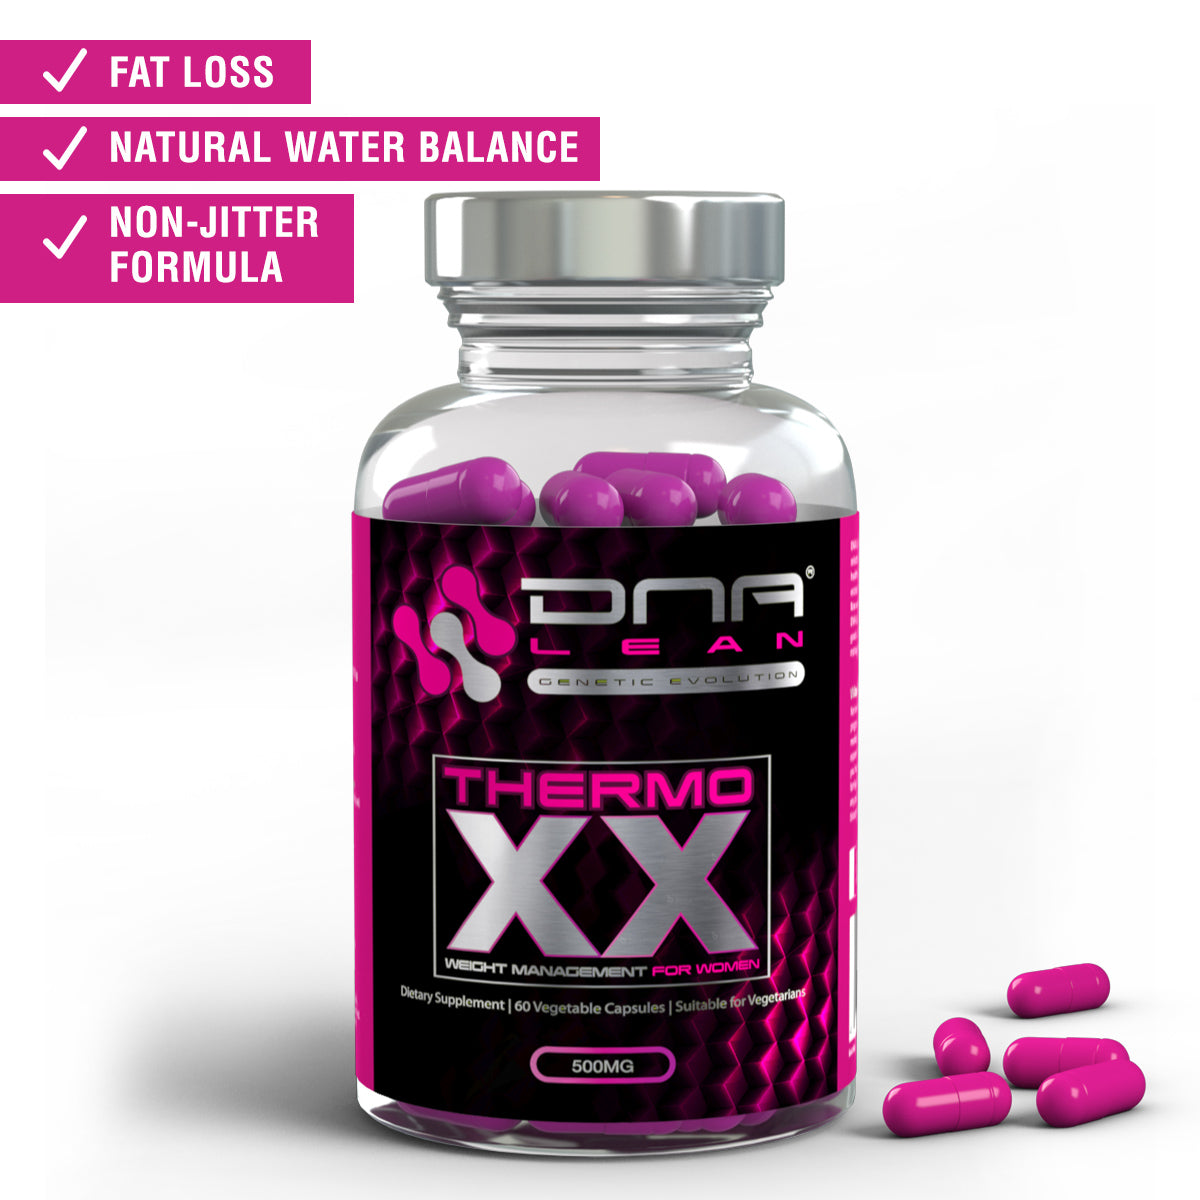 DNA Lean Thermo XX fat burner For Women